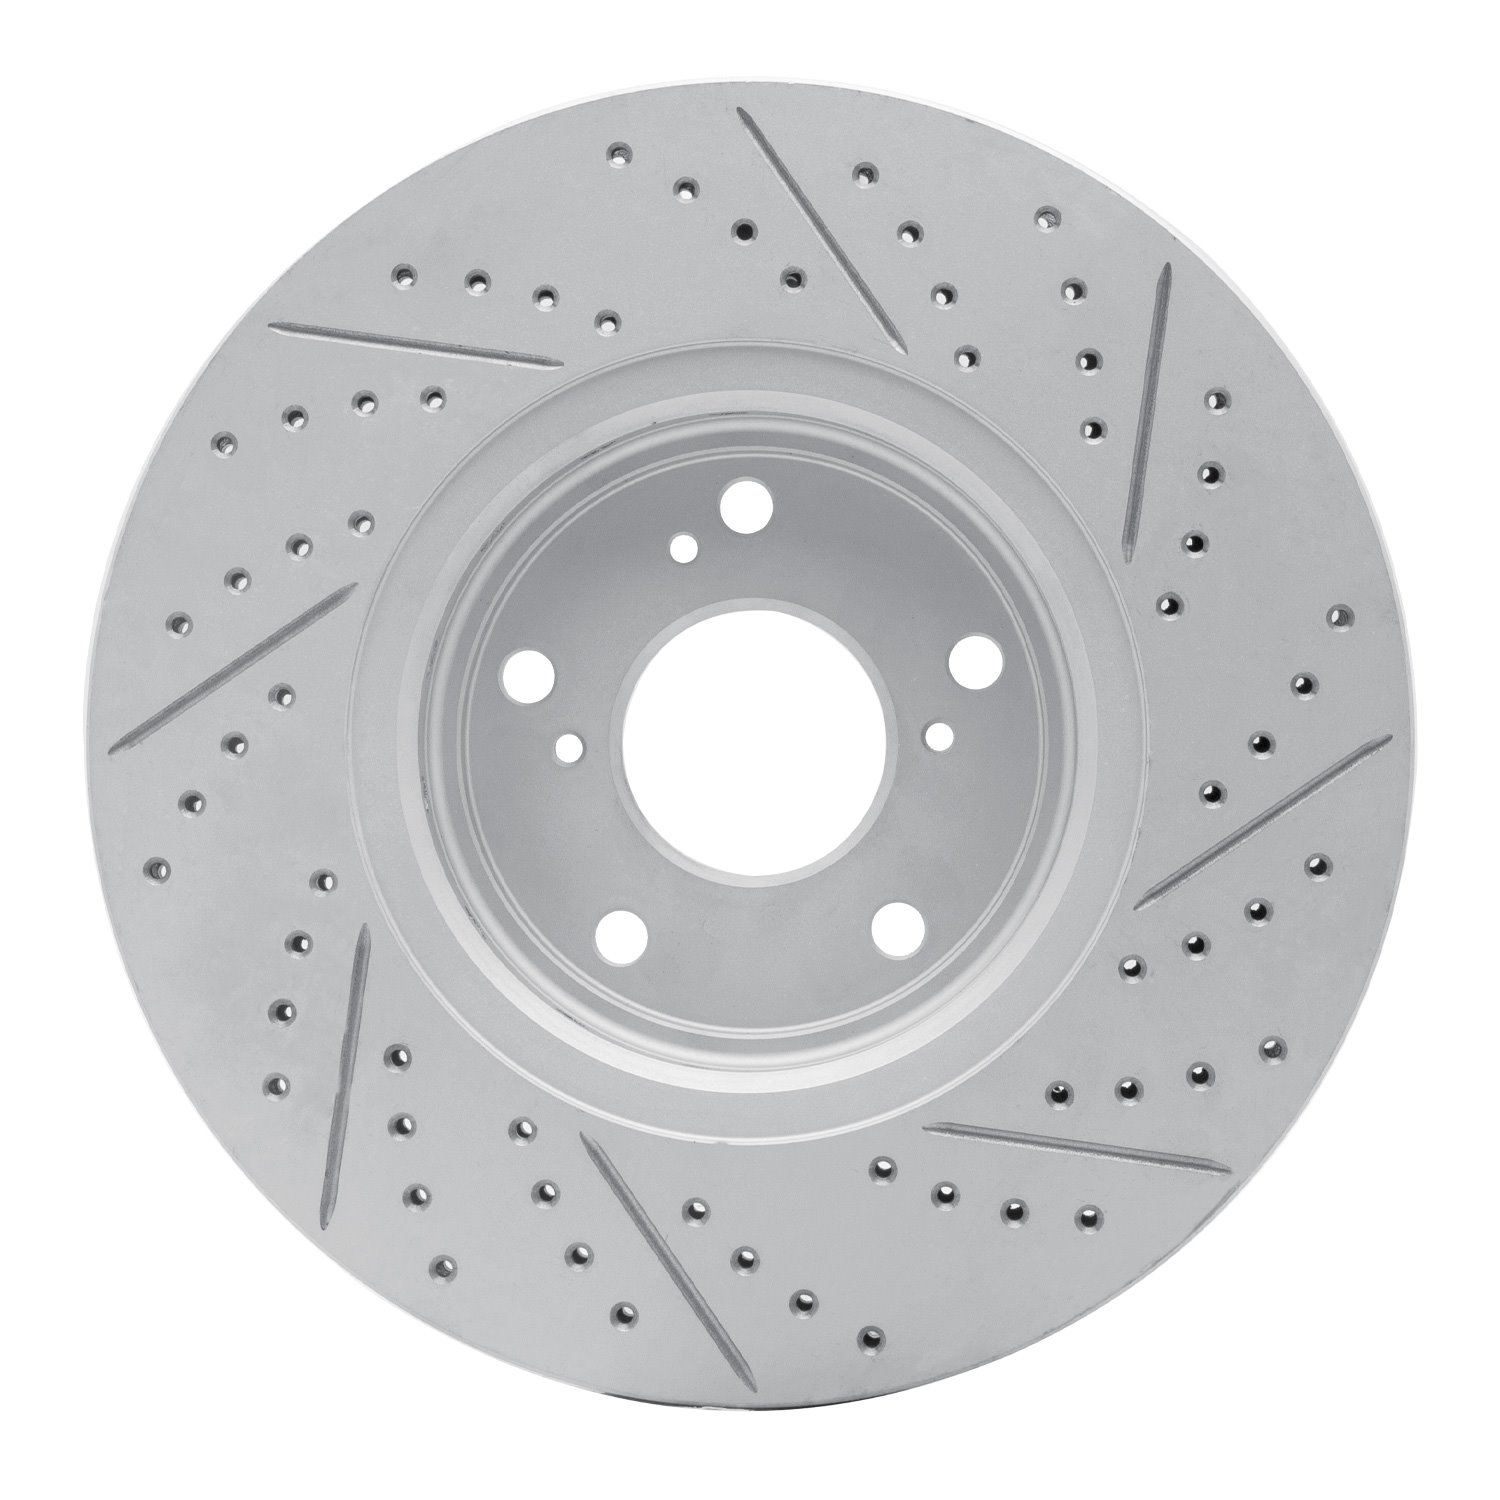 830-59063L Geoperformance Drilled/Slotted Brake Rotor, Fits Select Acura/Honda, Position: Front Left